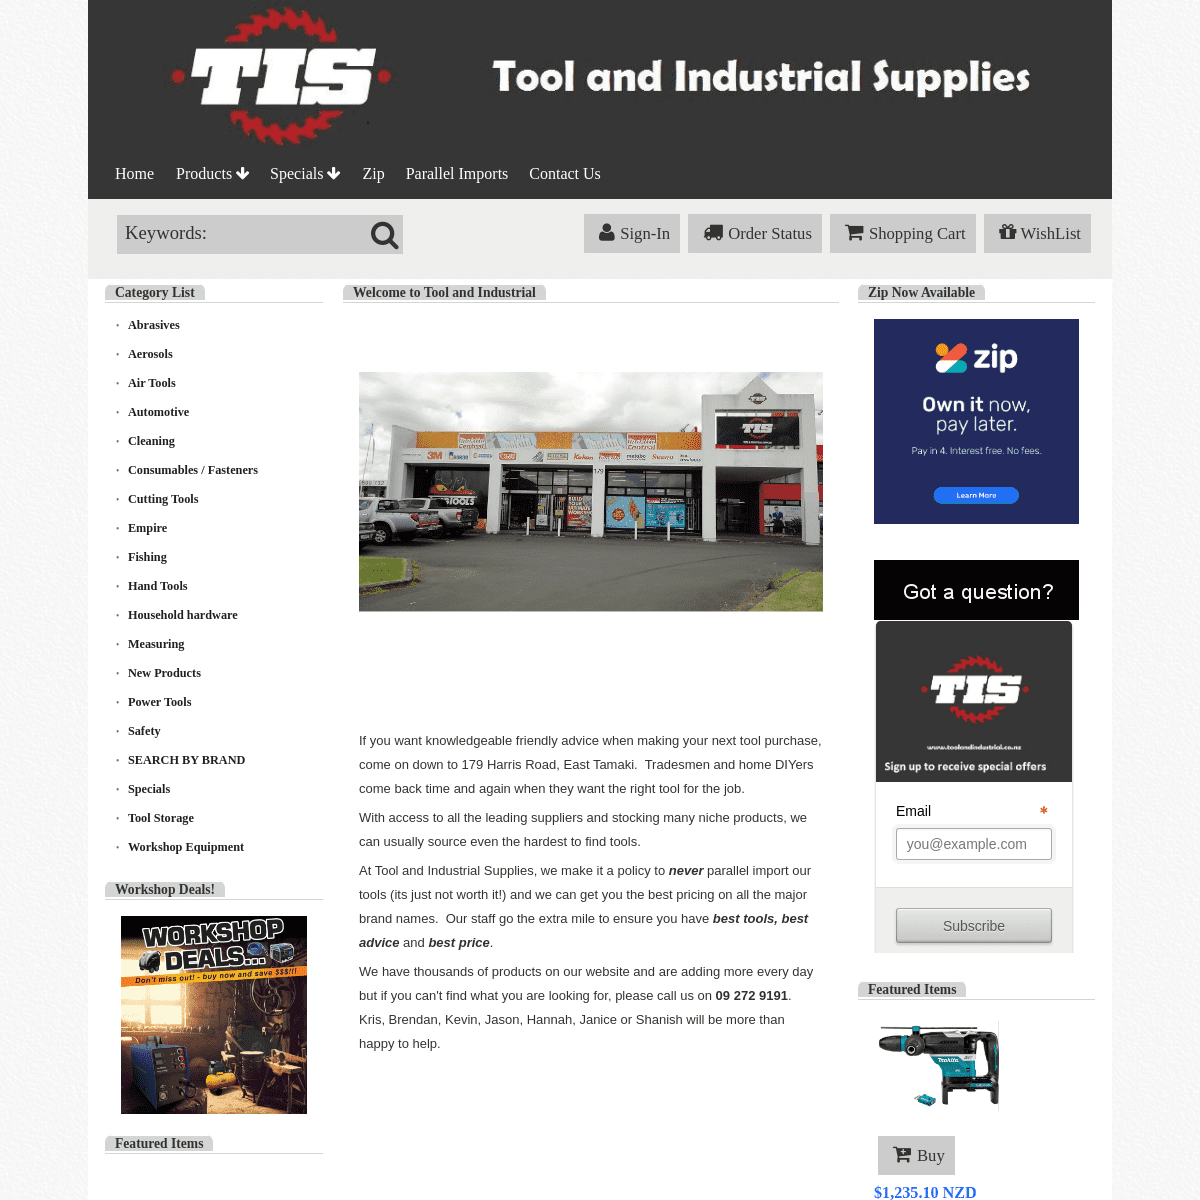 A complete backup of toolandindustrial.co.nz